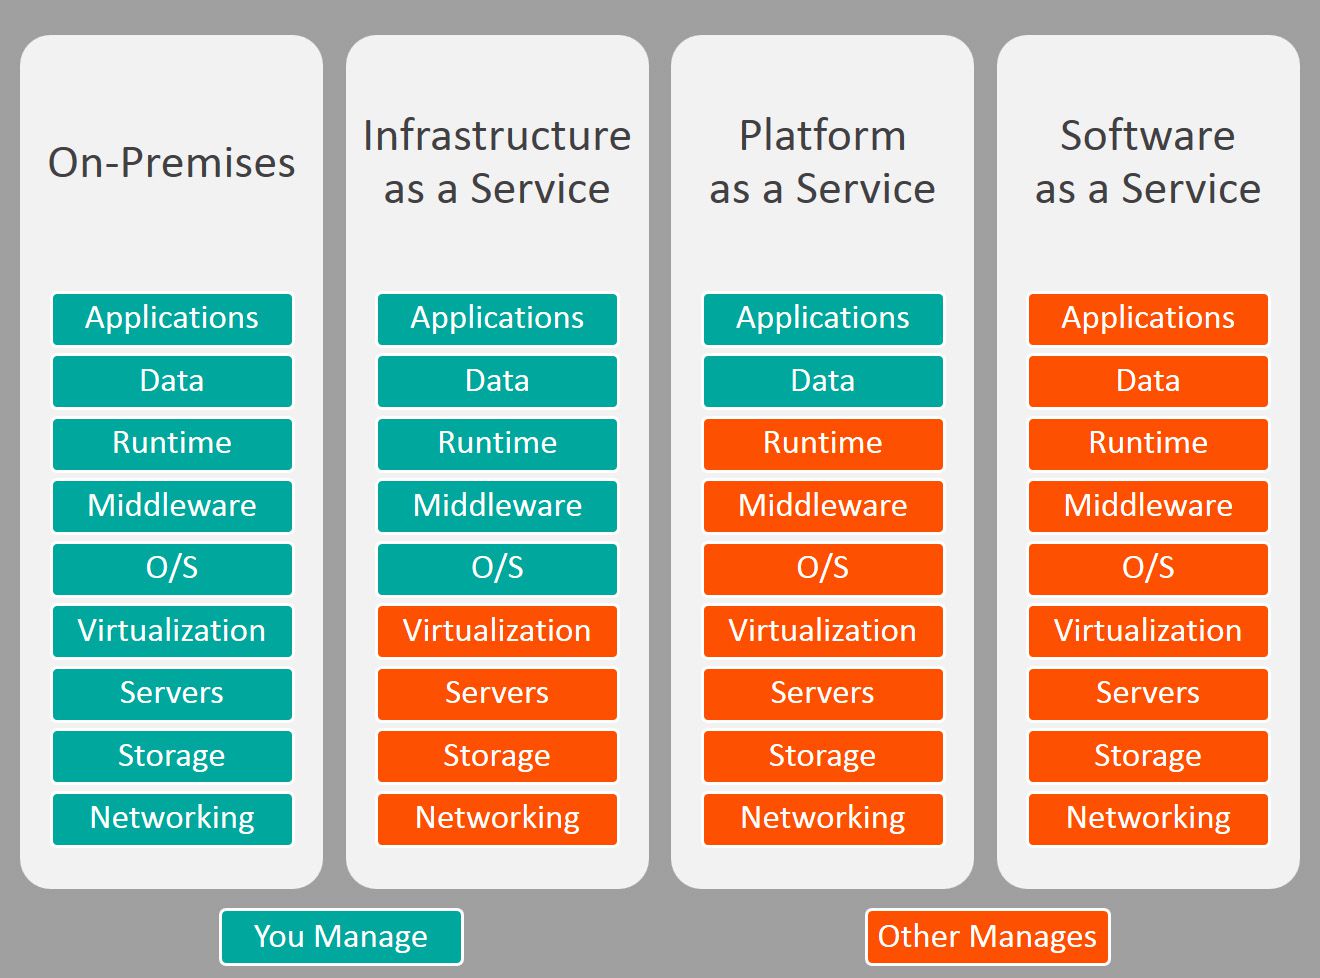 Azure Solutions Iaas Vs Paas A Comparison Including Best Tools